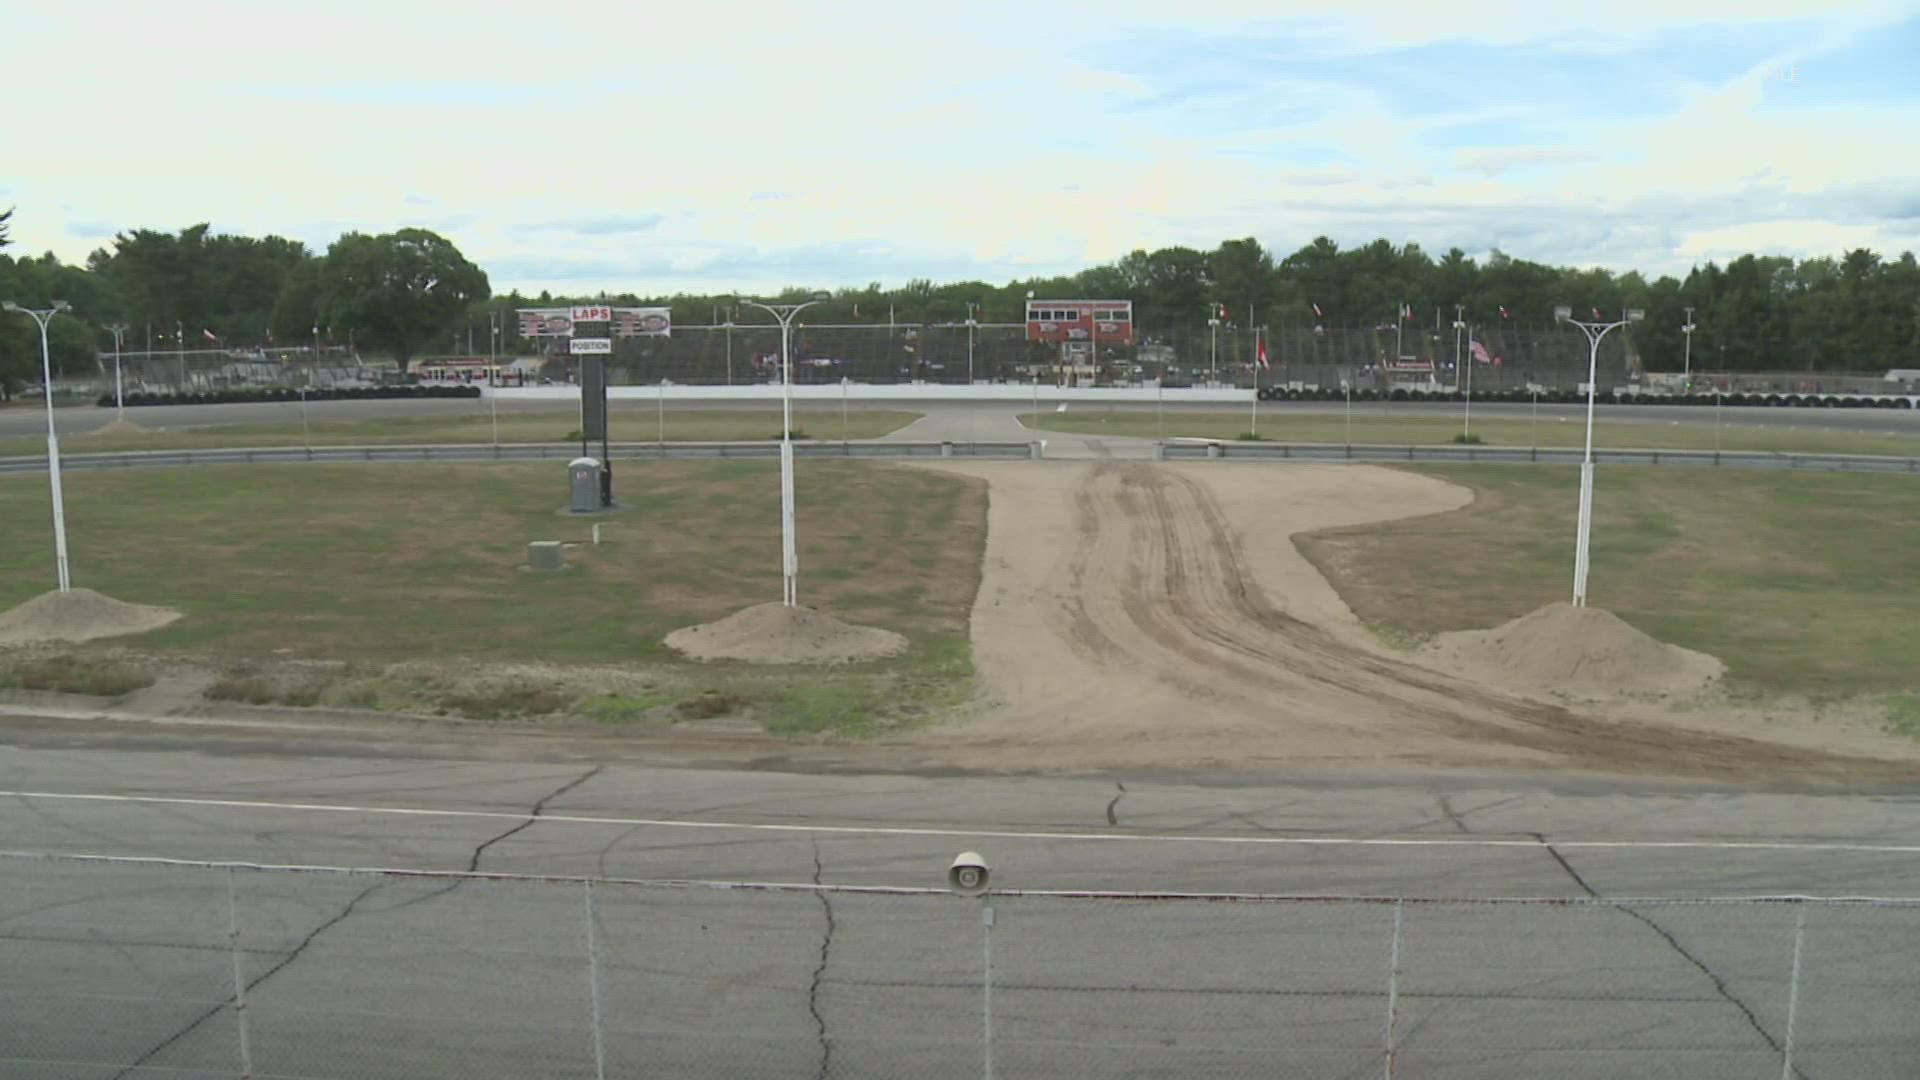 Track owner Andy Cusack announced the speedway was under contract with real estate developers